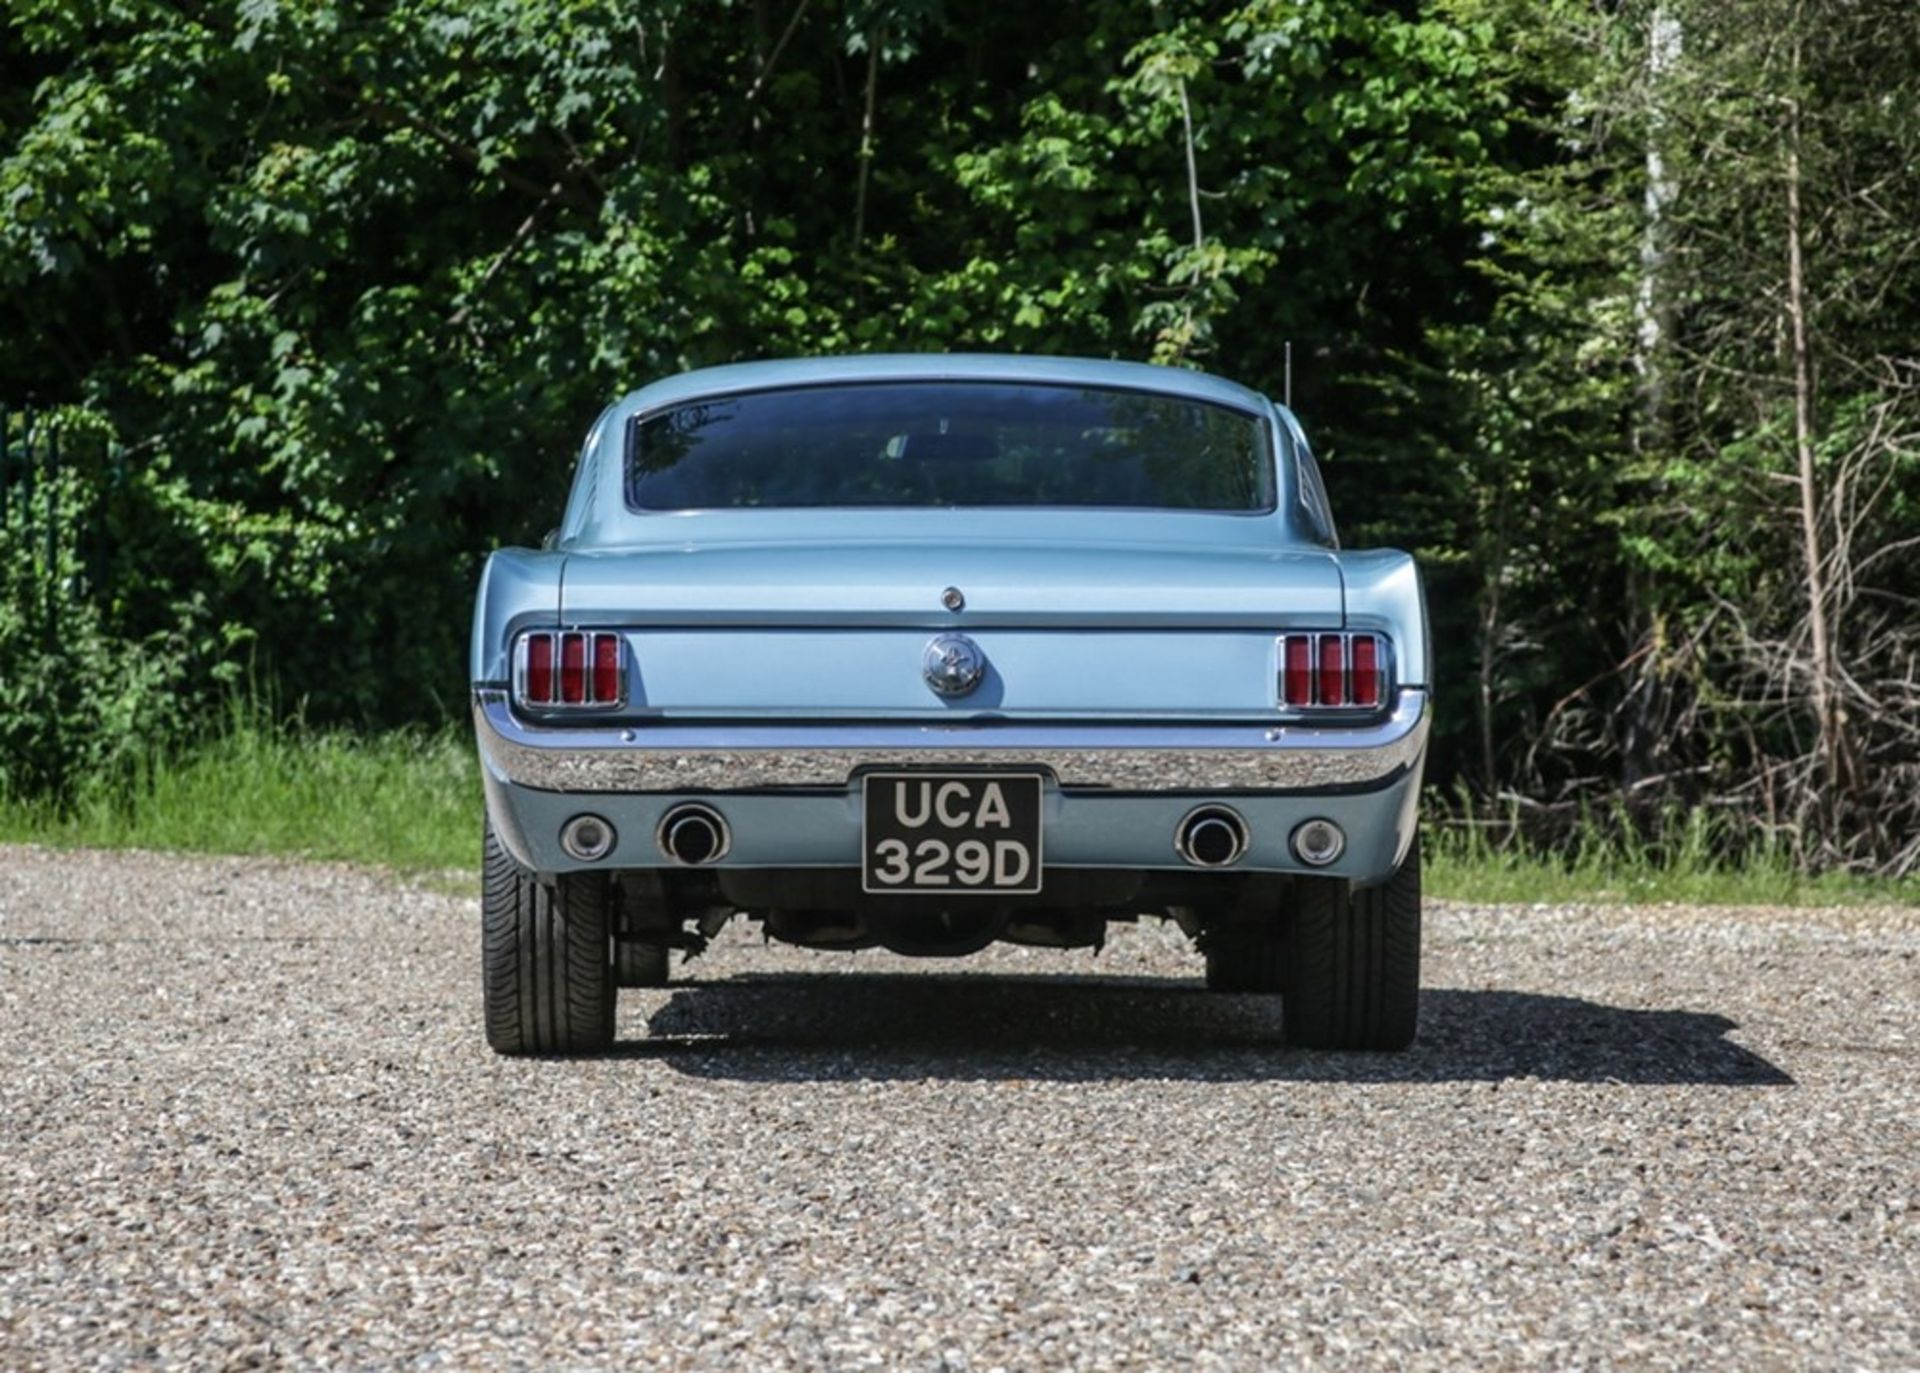 1966 Ford Mustang Fastback - Image 8 of 9